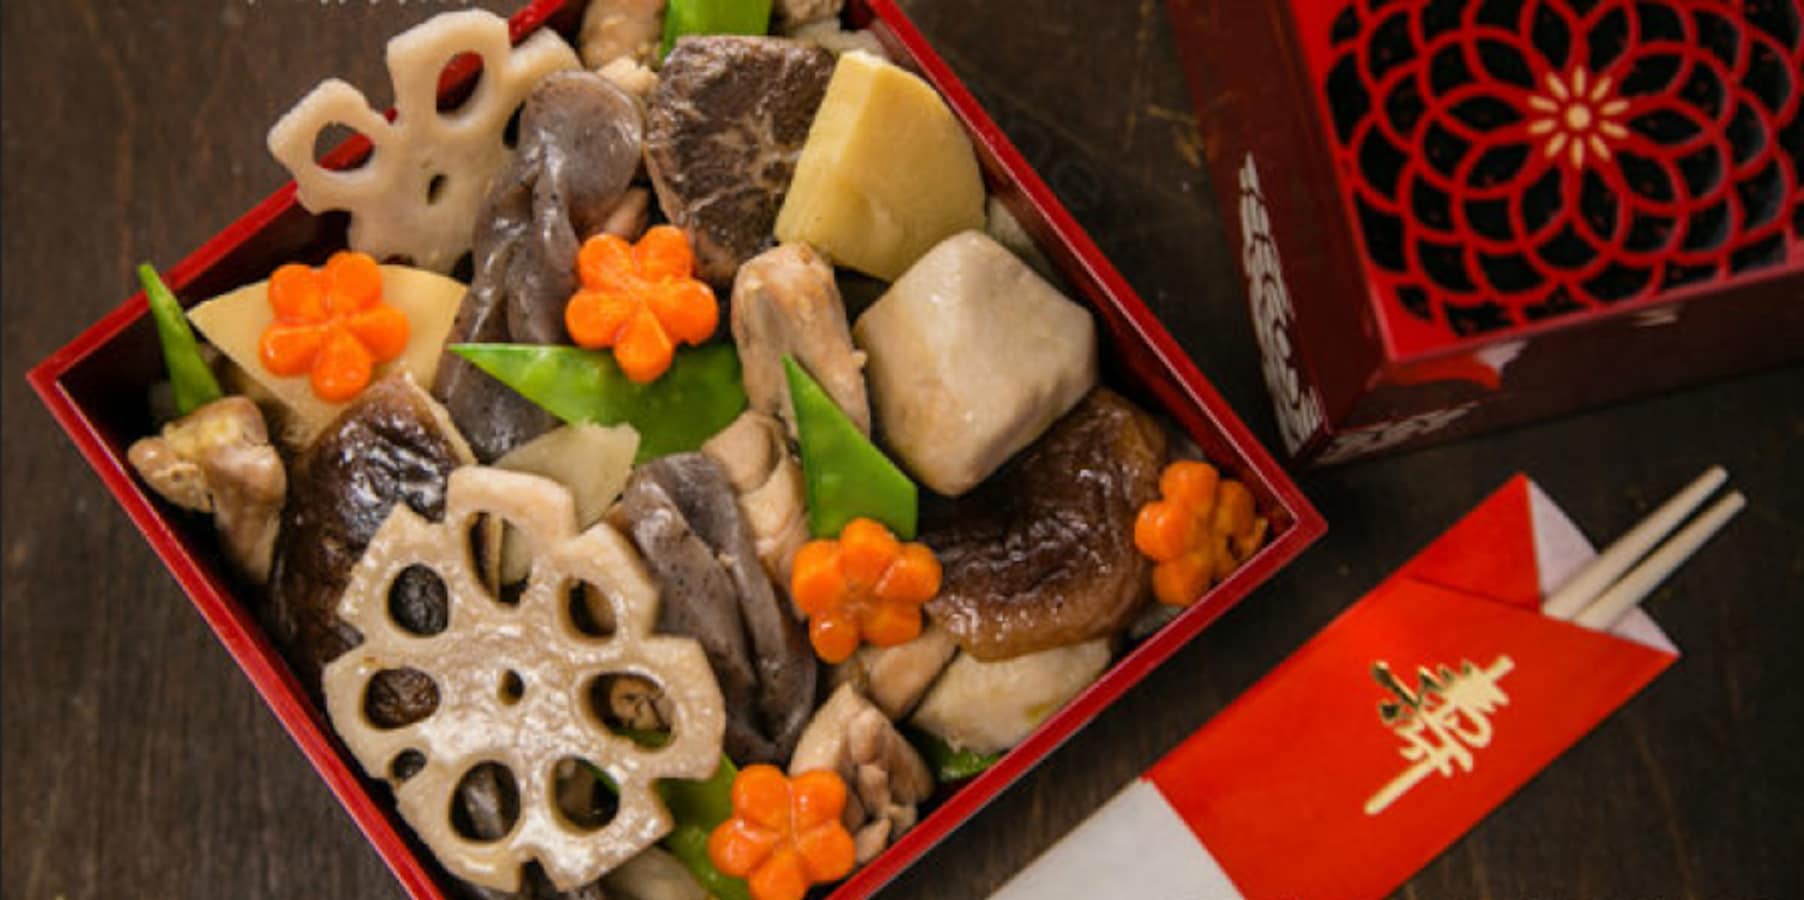 Bento in the Life of Japanese People, Kids Web Japan